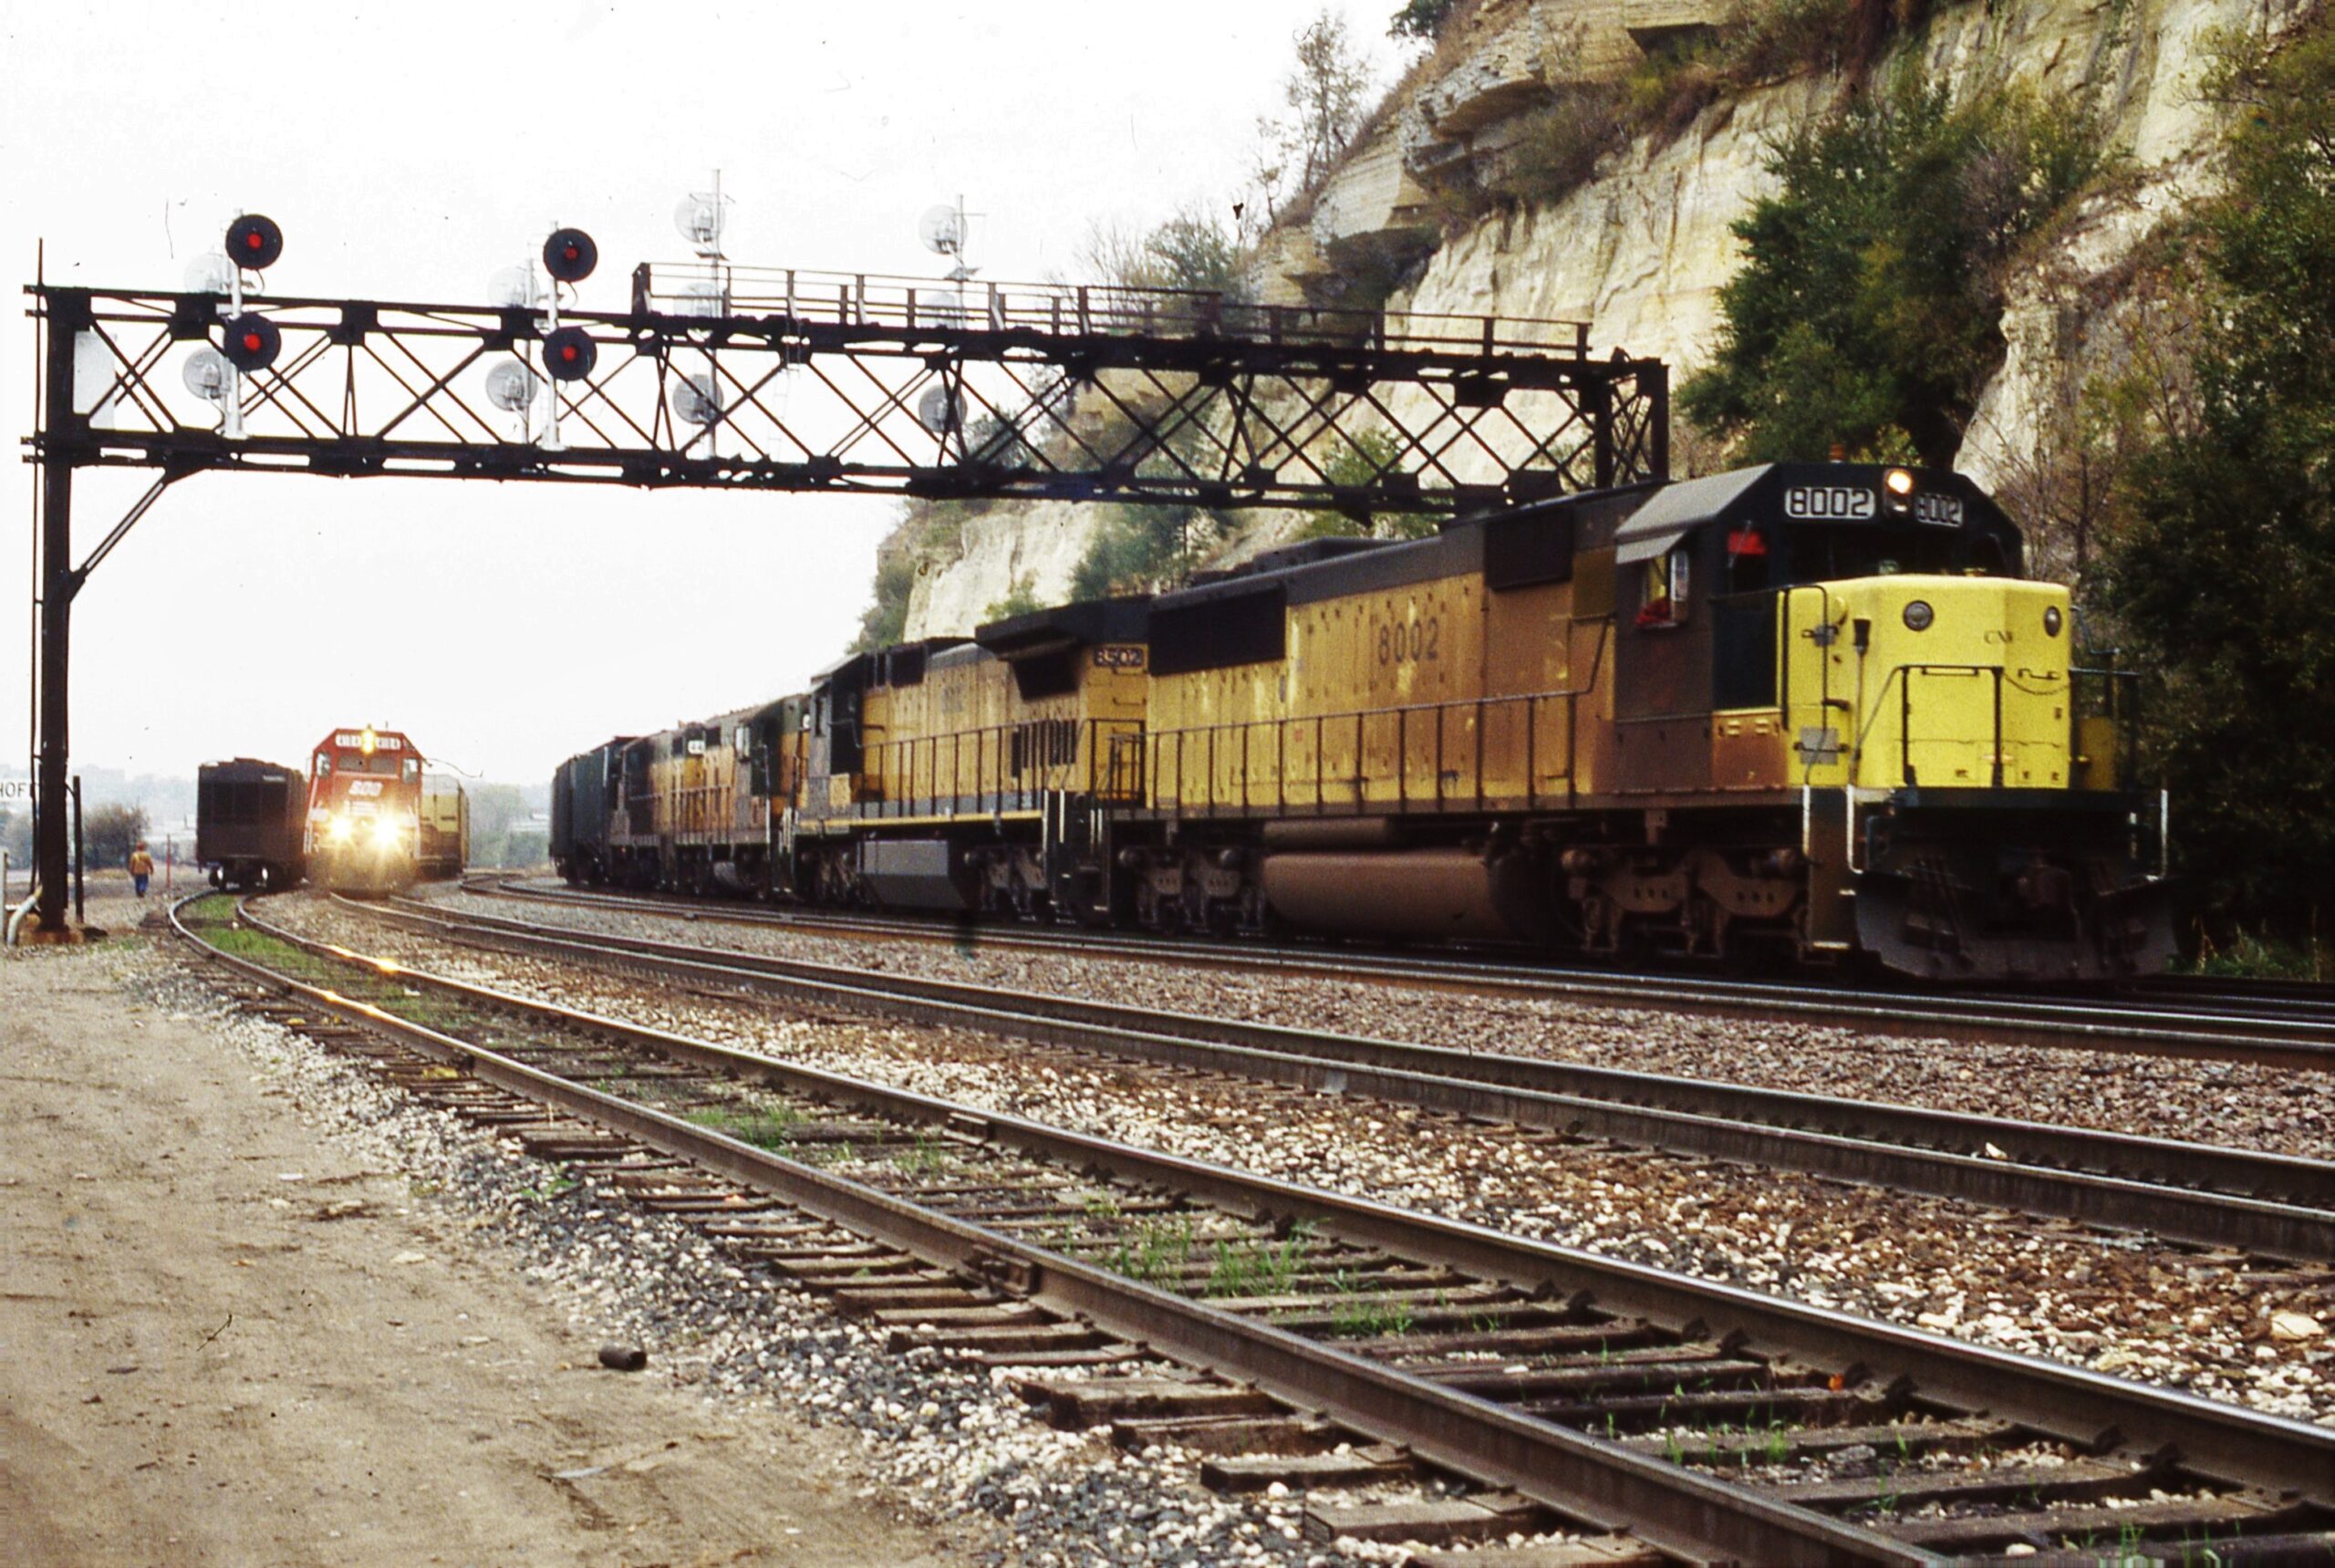 Chicago and Northwestern | Saint Paul, Mn. | EMD SD60 8002 + 3 diesel-electric locomotives | eastbound freight | Hoffmans | October 20, 1992 | Dick Flock photograph